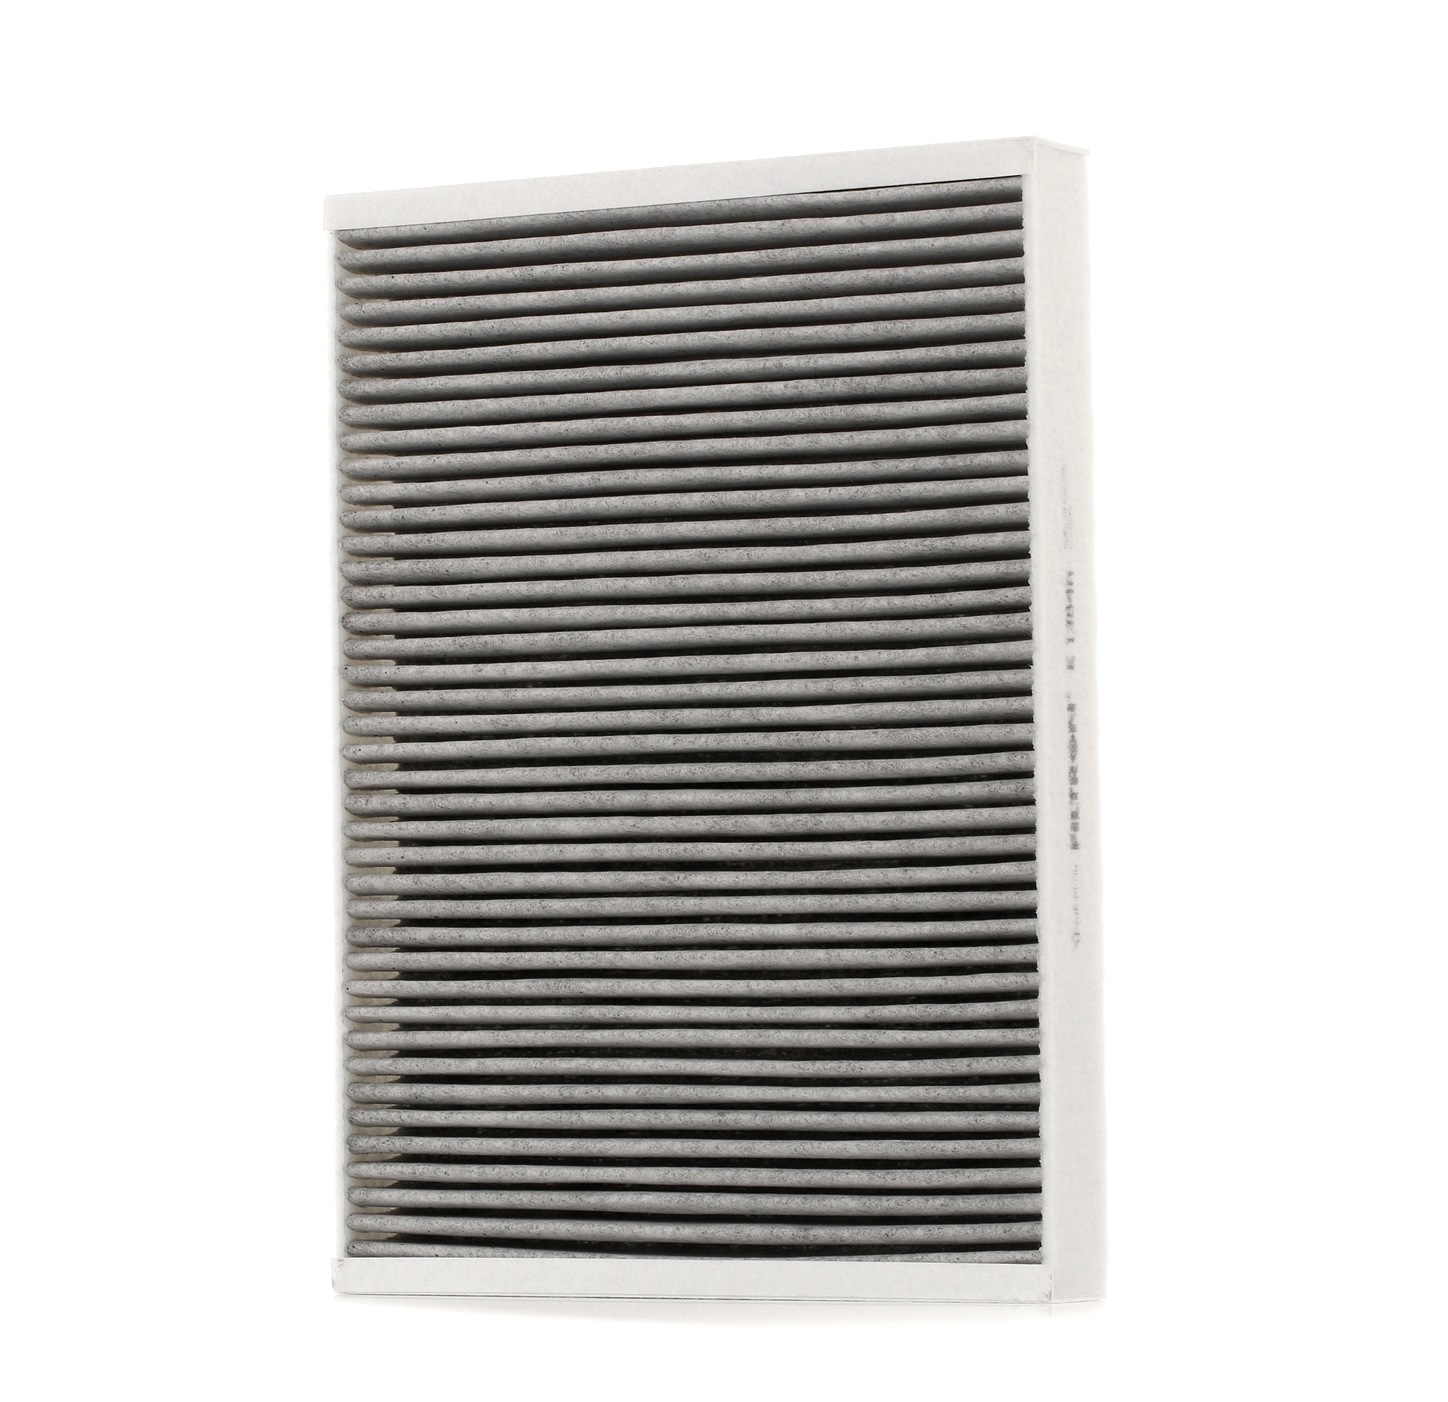 Volvo S40 Air conditioning filter 13884082 FILTRON K 1384A online buy